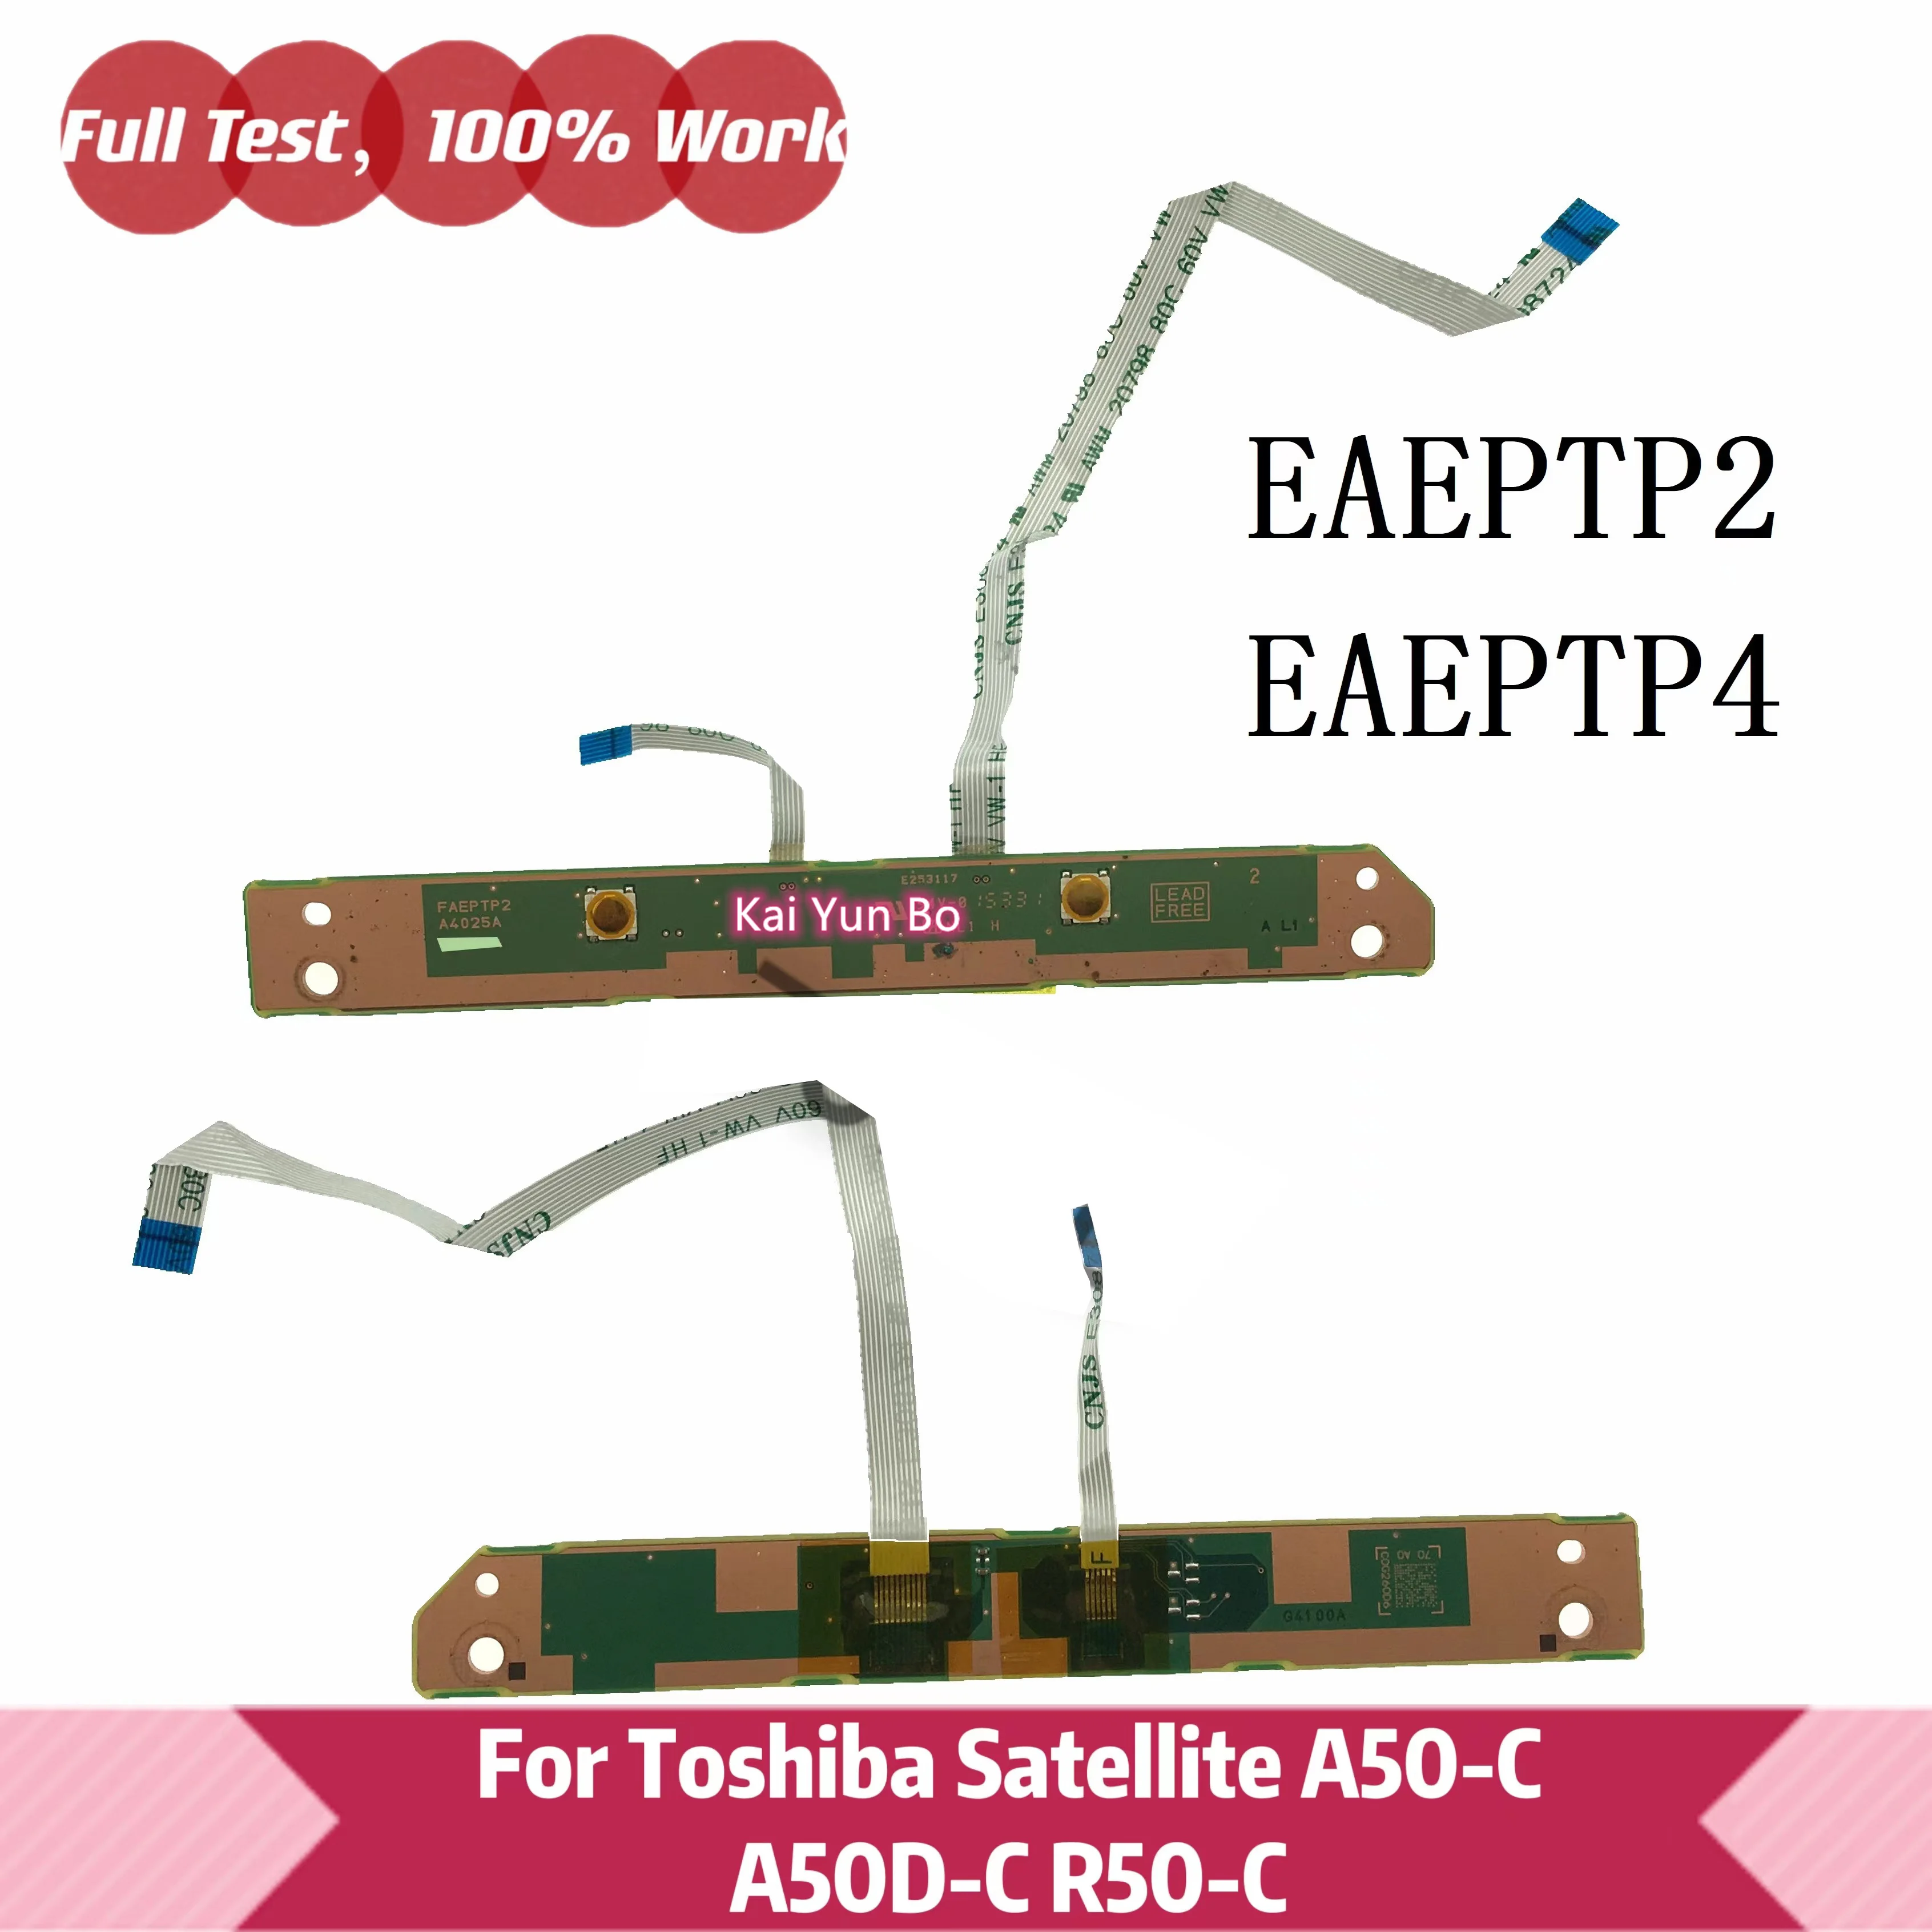 

Laptop Mouse Click Button Board w/ Cable For Toshiba Satellite A50-C A50D-C R50-C FAEPTP2 A4025A EAEPTP4 A4100A 100% Test ok